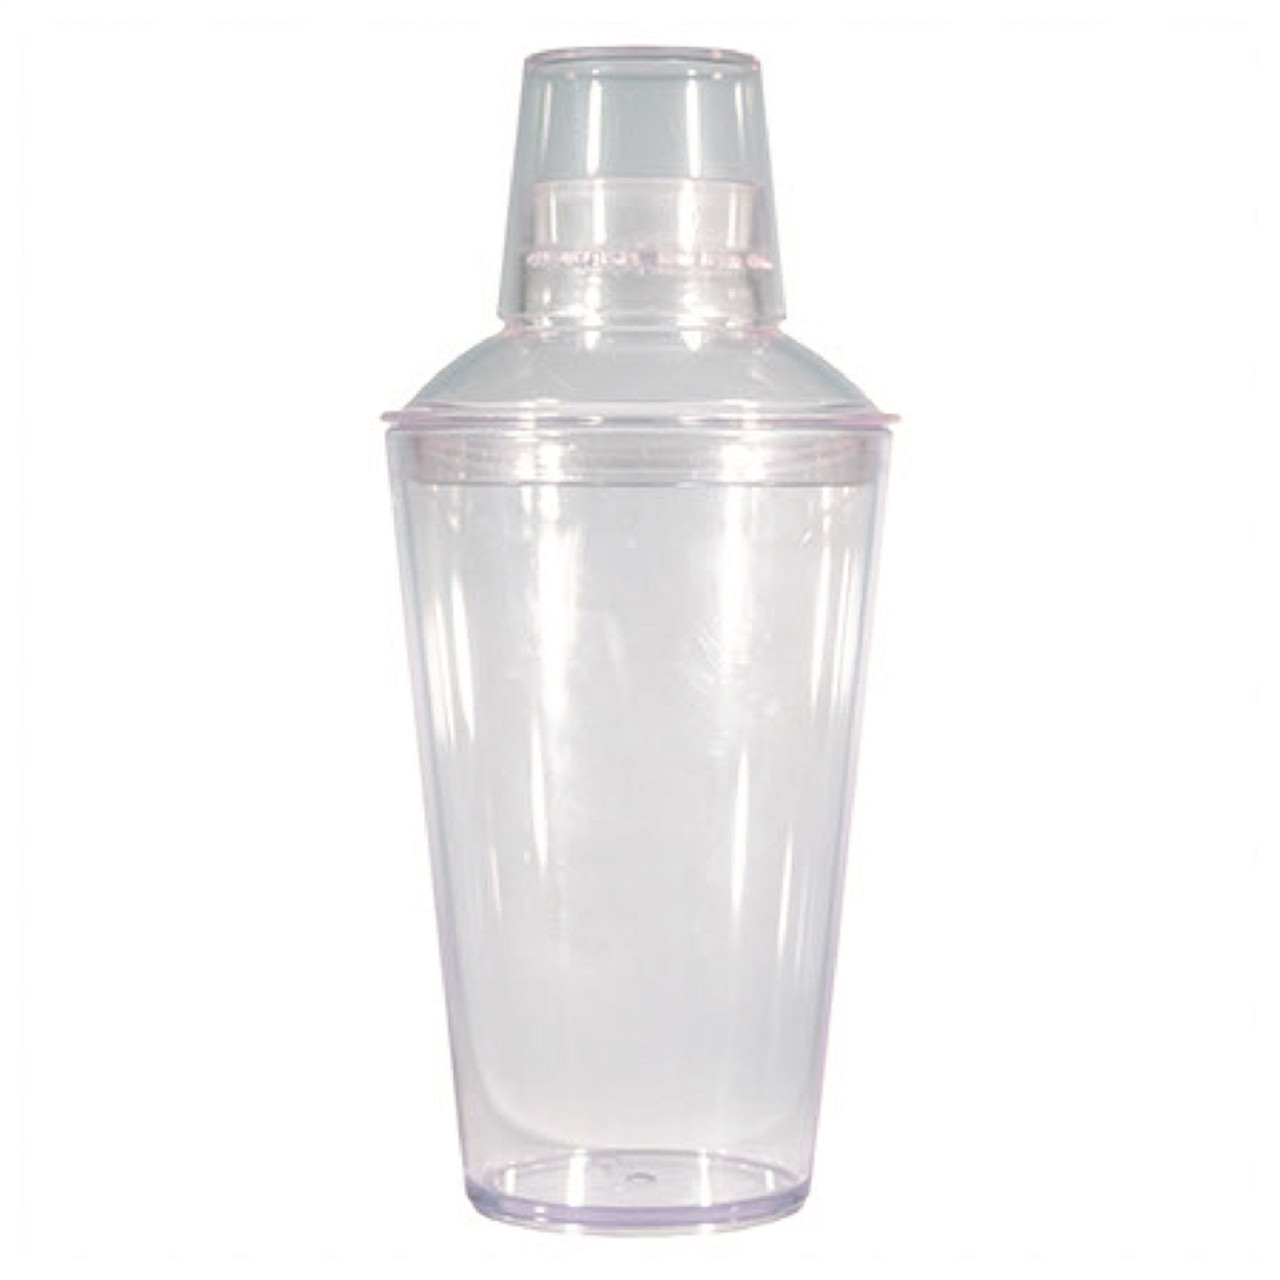 Acrylic Cocktail Shaker Sets 22 oz 15 shakers blank